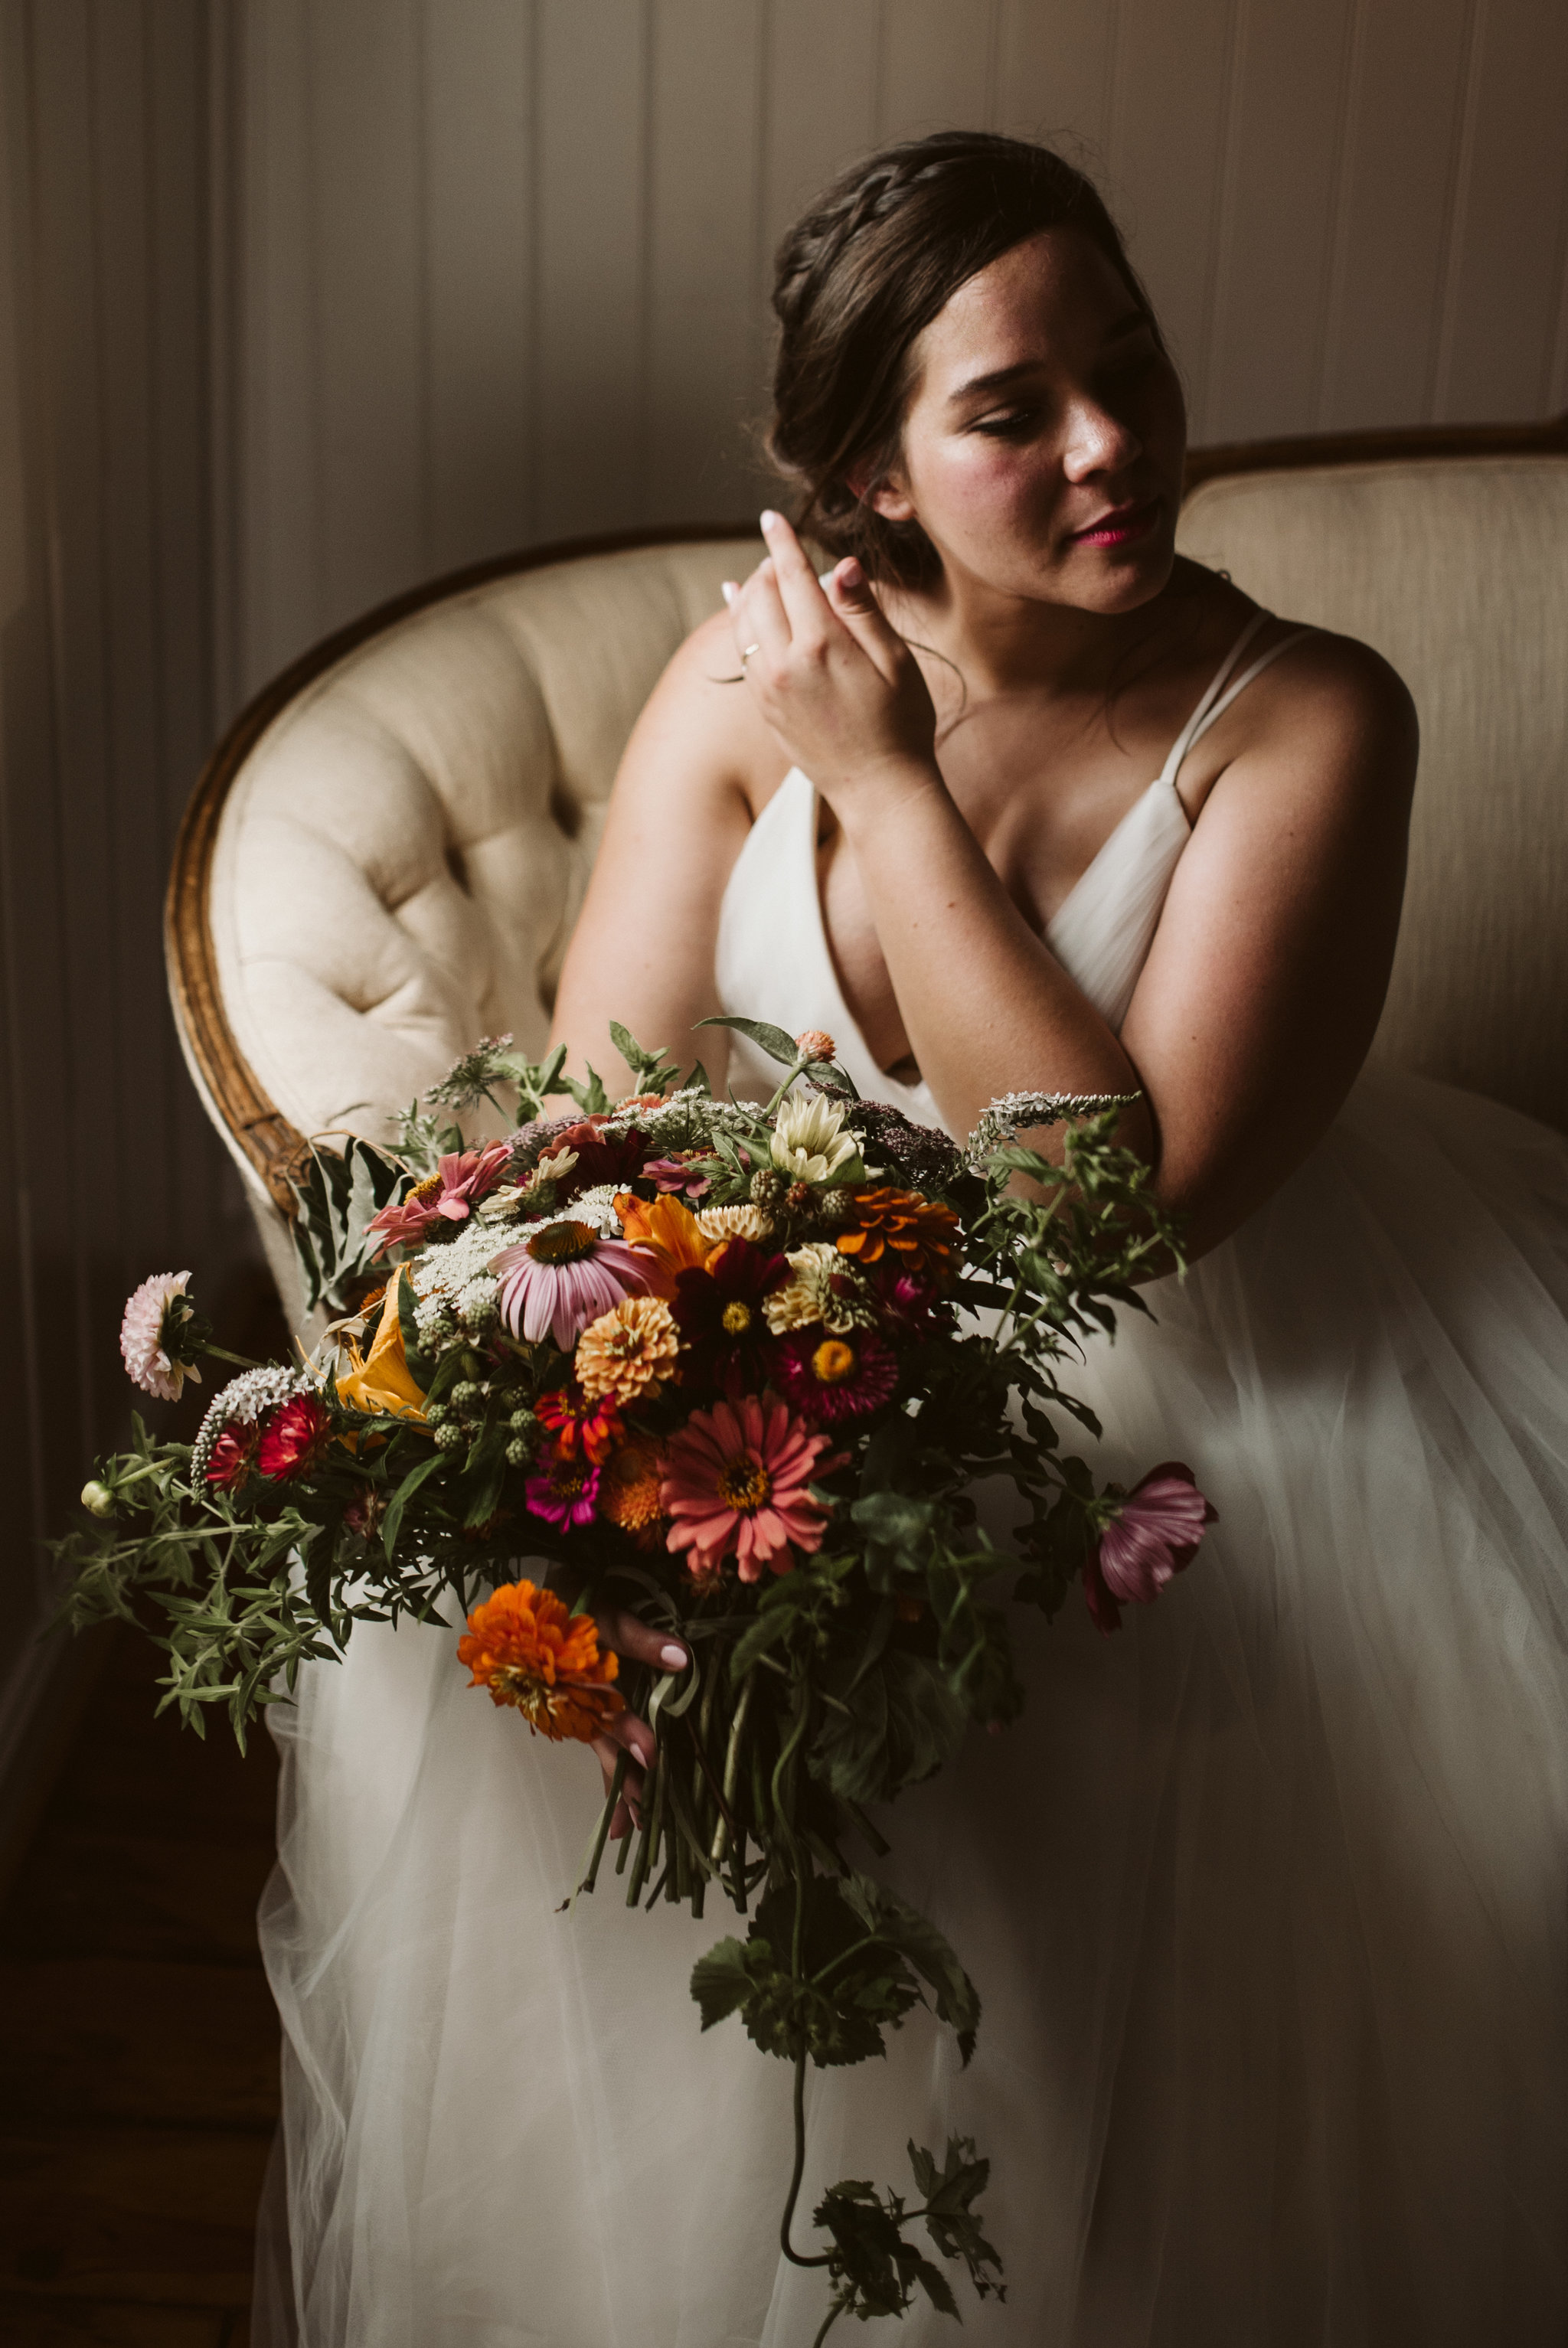 Rocklands Farm, Maryland, Intimate Wedding, Baltimore Wedding Photographer, Sungold Flower Co, Rustic, Romantic, Barn Wedding, Bride Portrait, Purple and Orange and Maroon Flowers in Bouquet